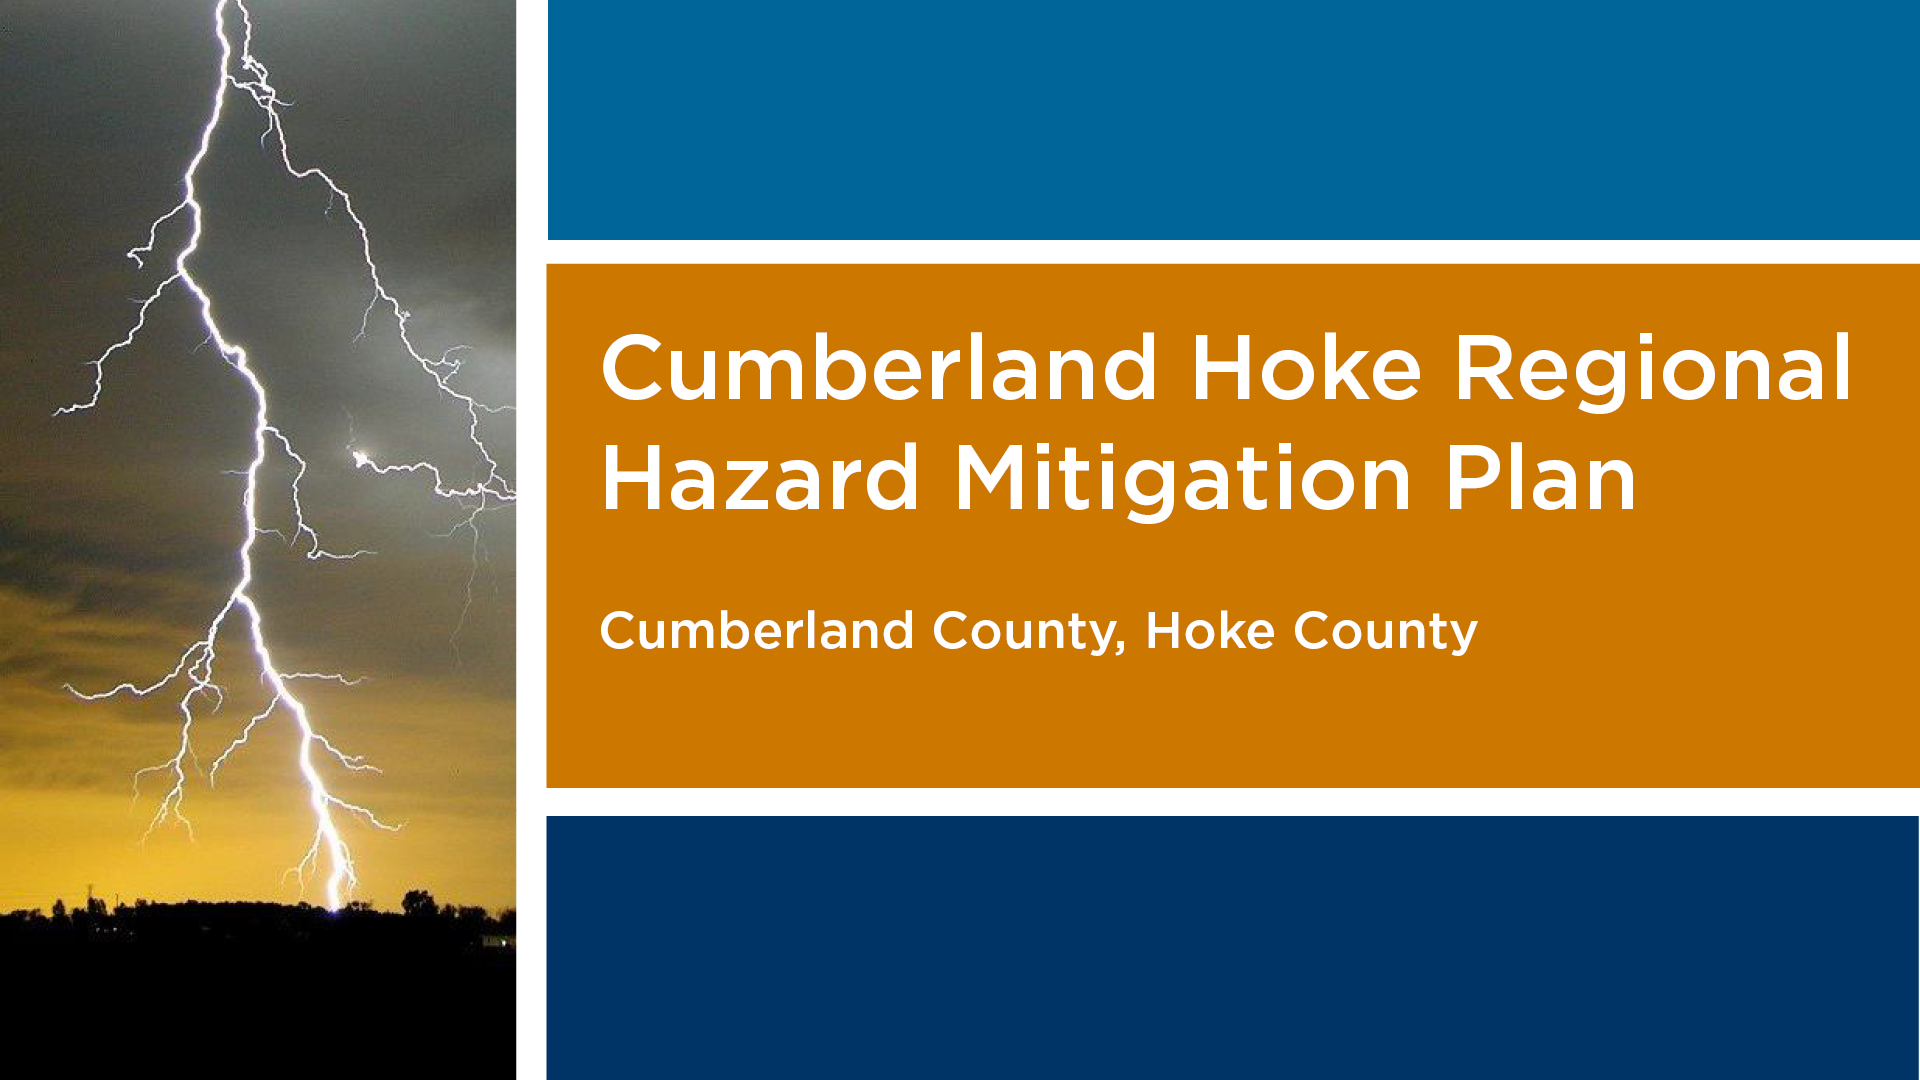 Hazard Mitigation Plan for Cumberland and Hoke Counties